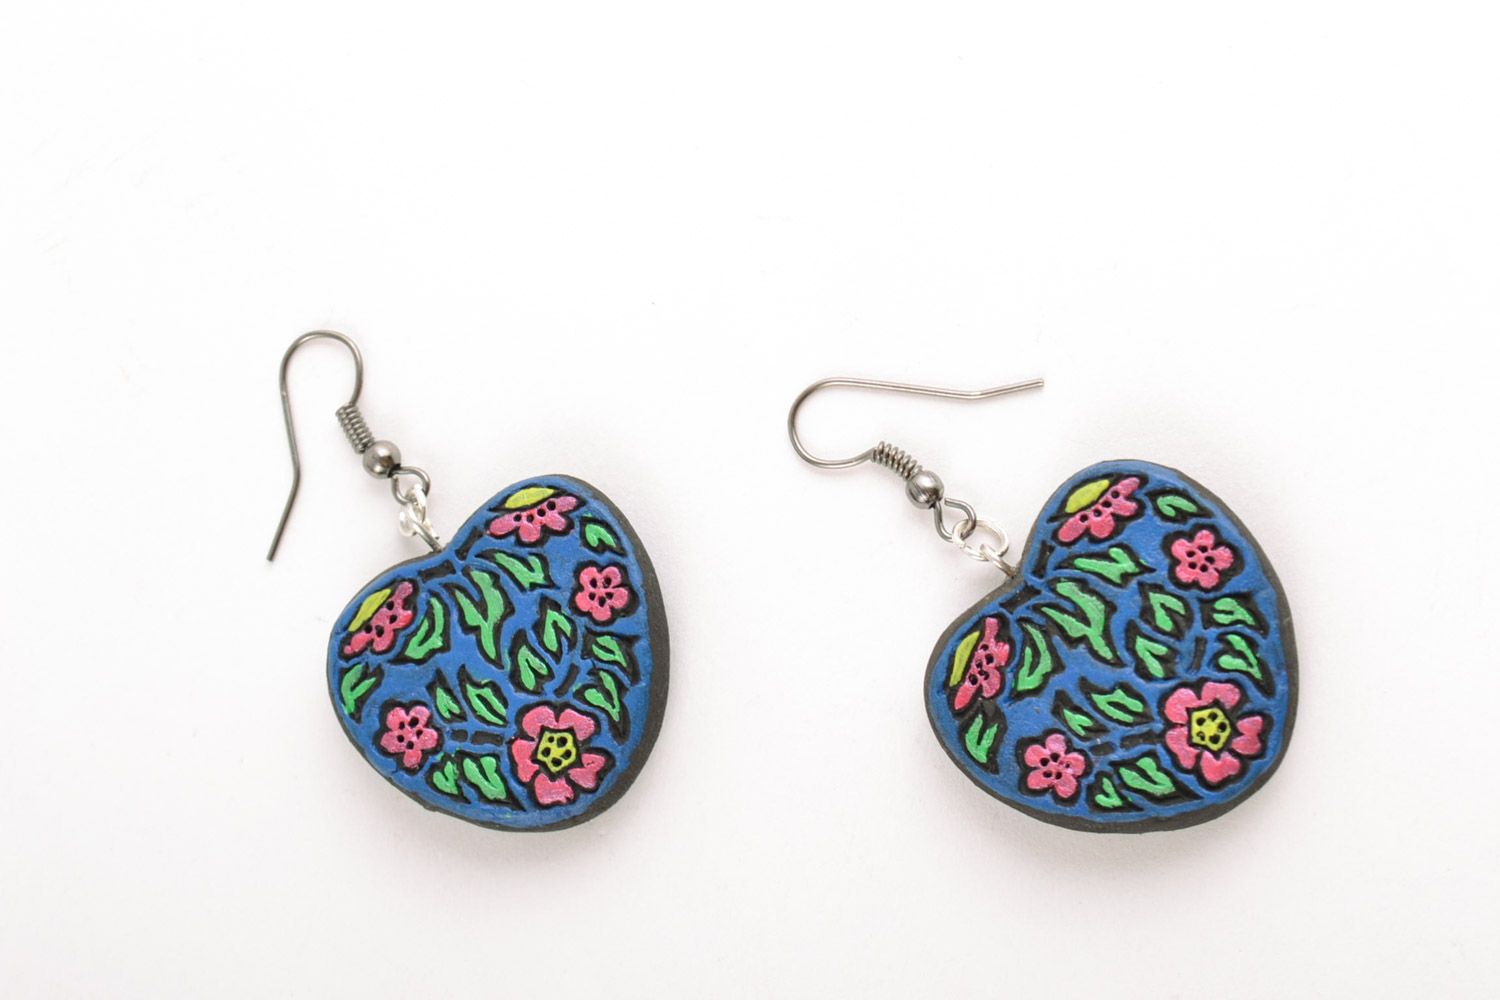 Handmade heart-shaped painted blue ceramic dangling earrings with floral pattern photo 5